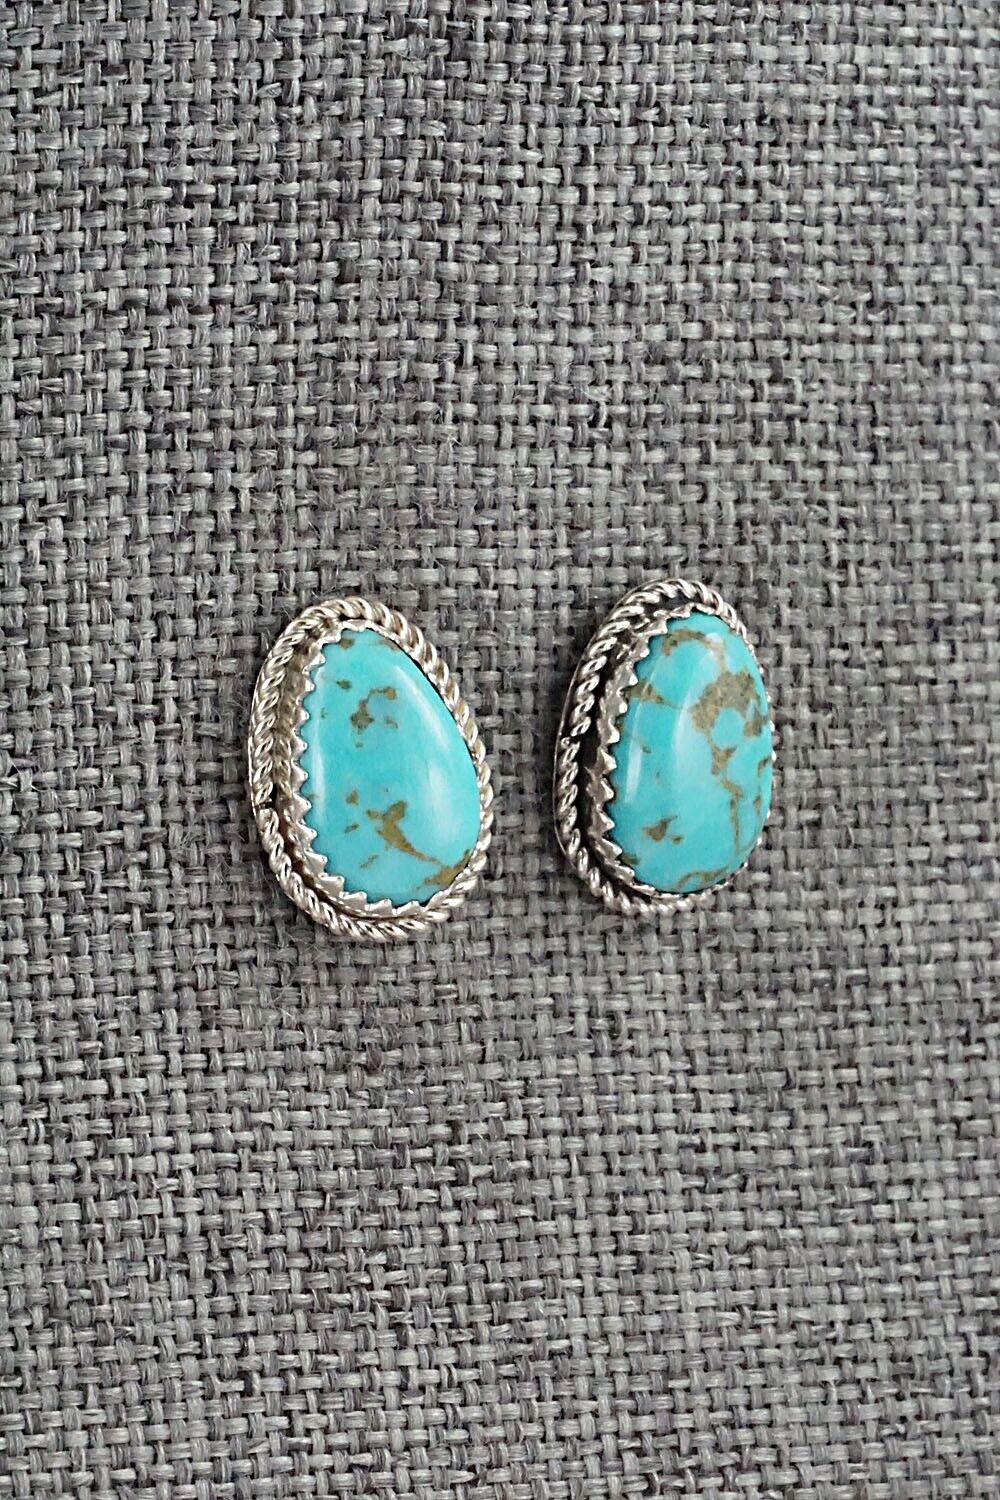 Turquoise & Sterling Silver Earrings - Sally Arviso